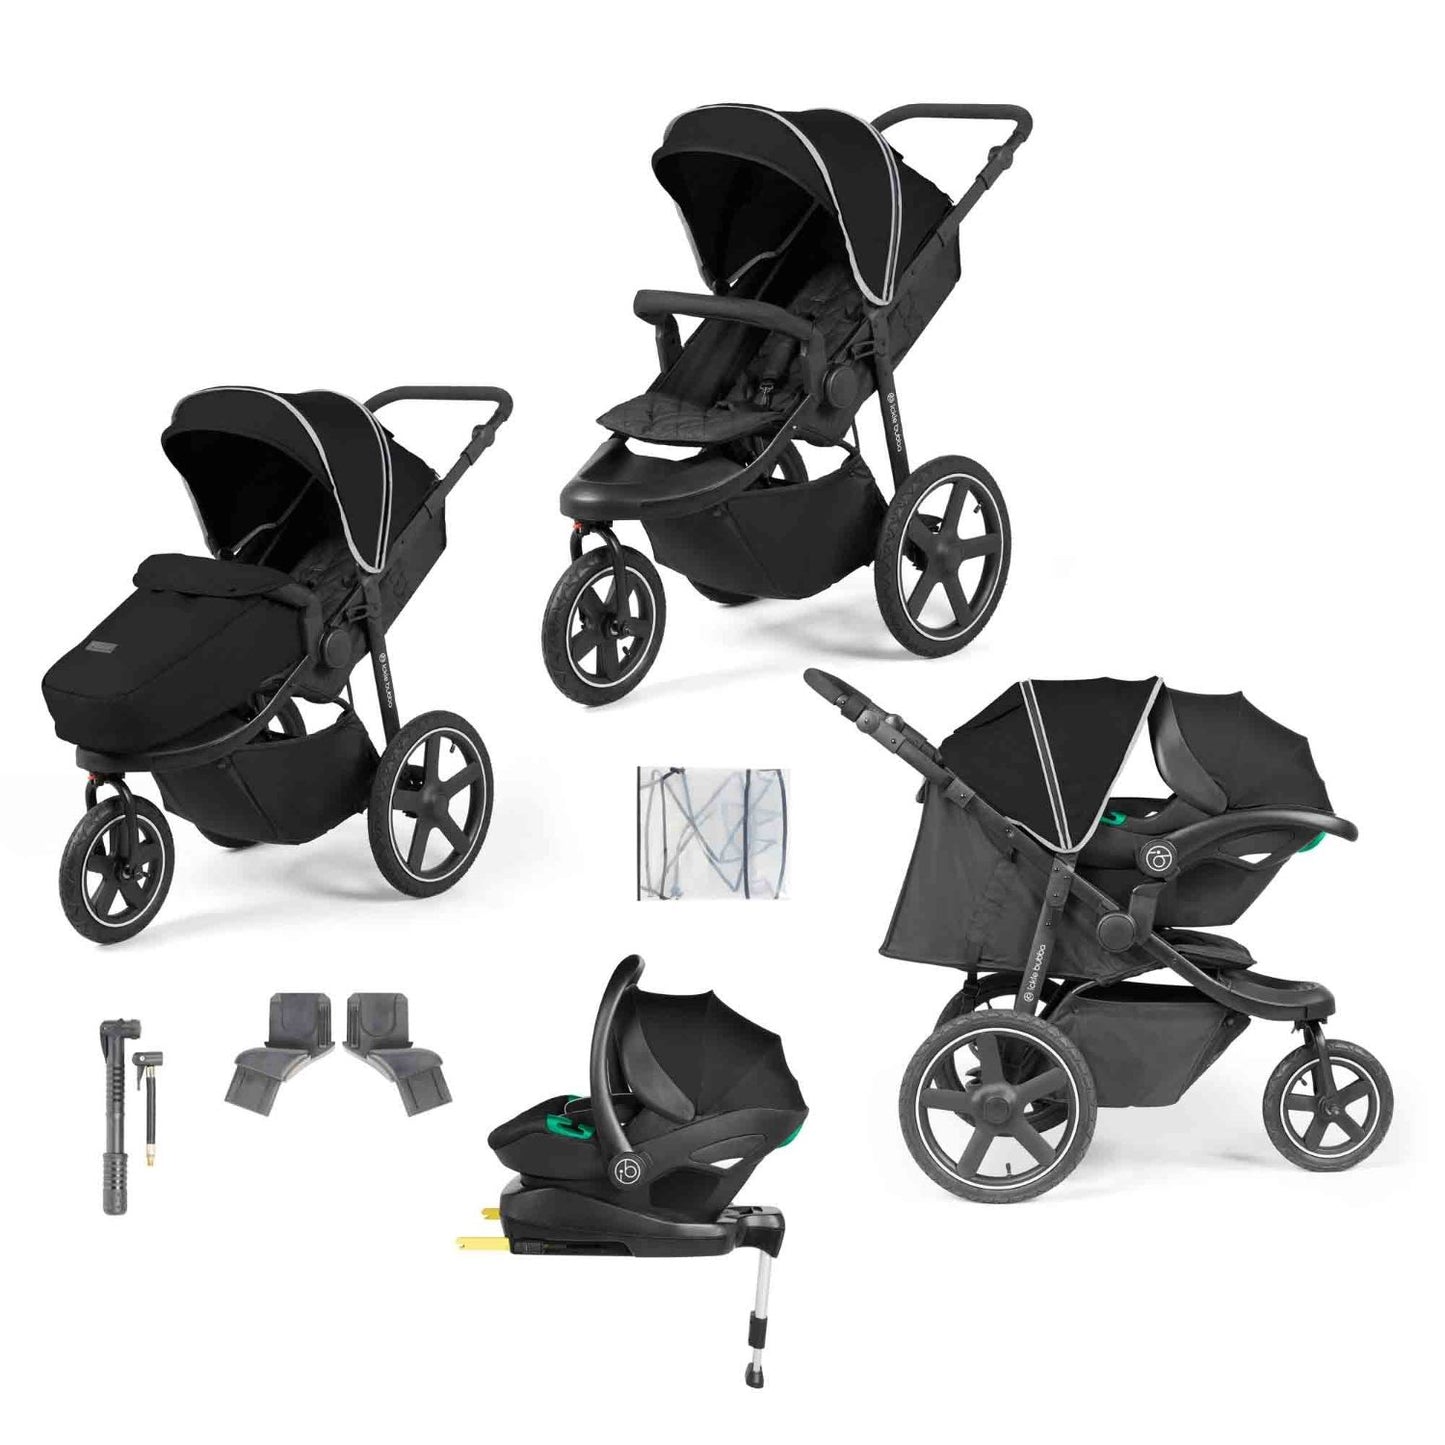 Ickle Bubba Venus Max Jogger Travel System with Stratus i-Size car seat and ISOFIX base in Black colour